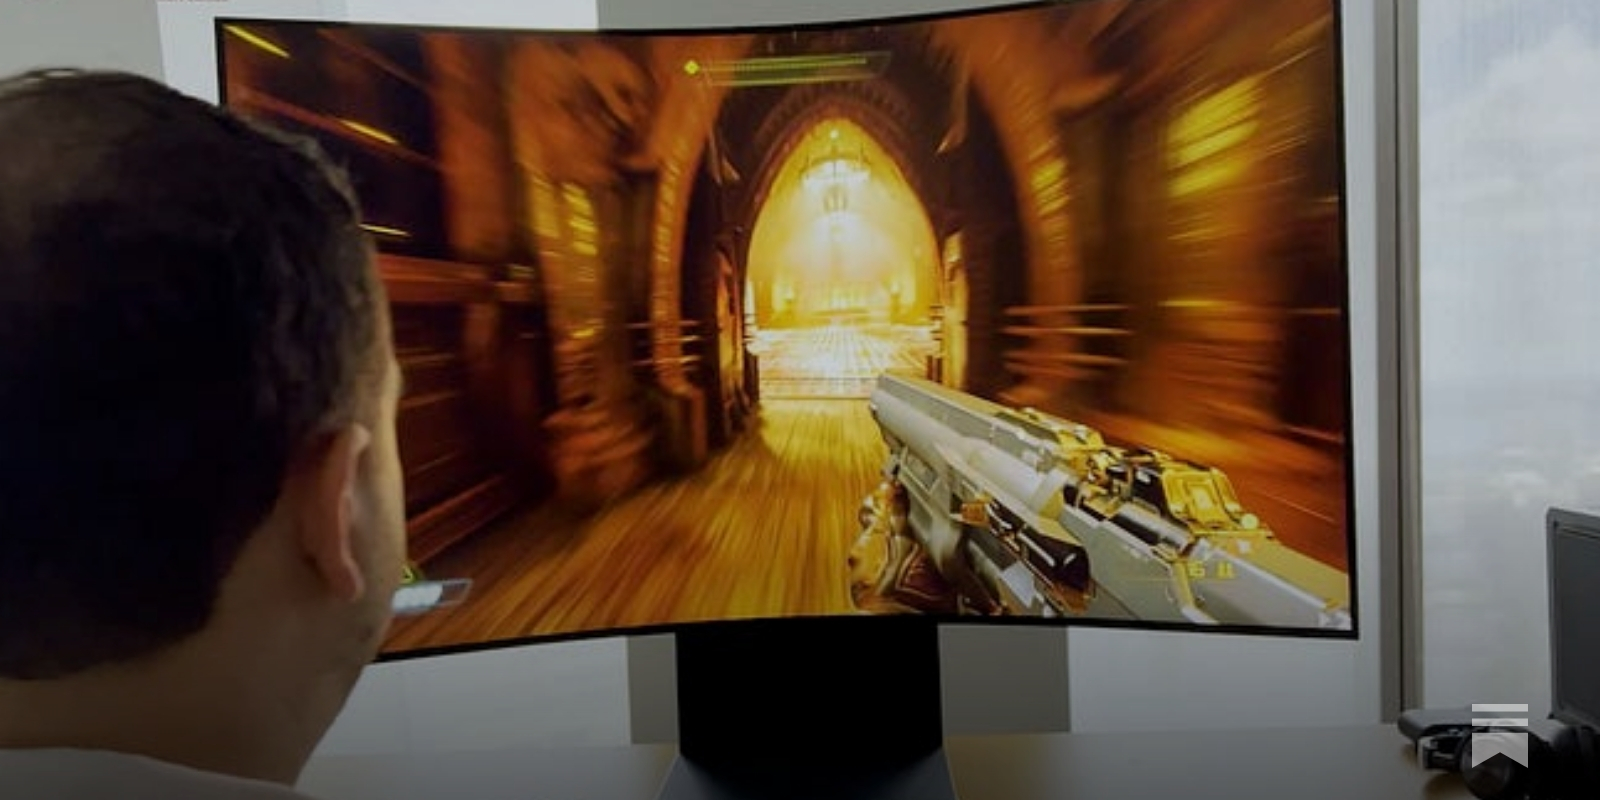 Samsung Odyssey Ark price: $1,000 off this gaming monitor